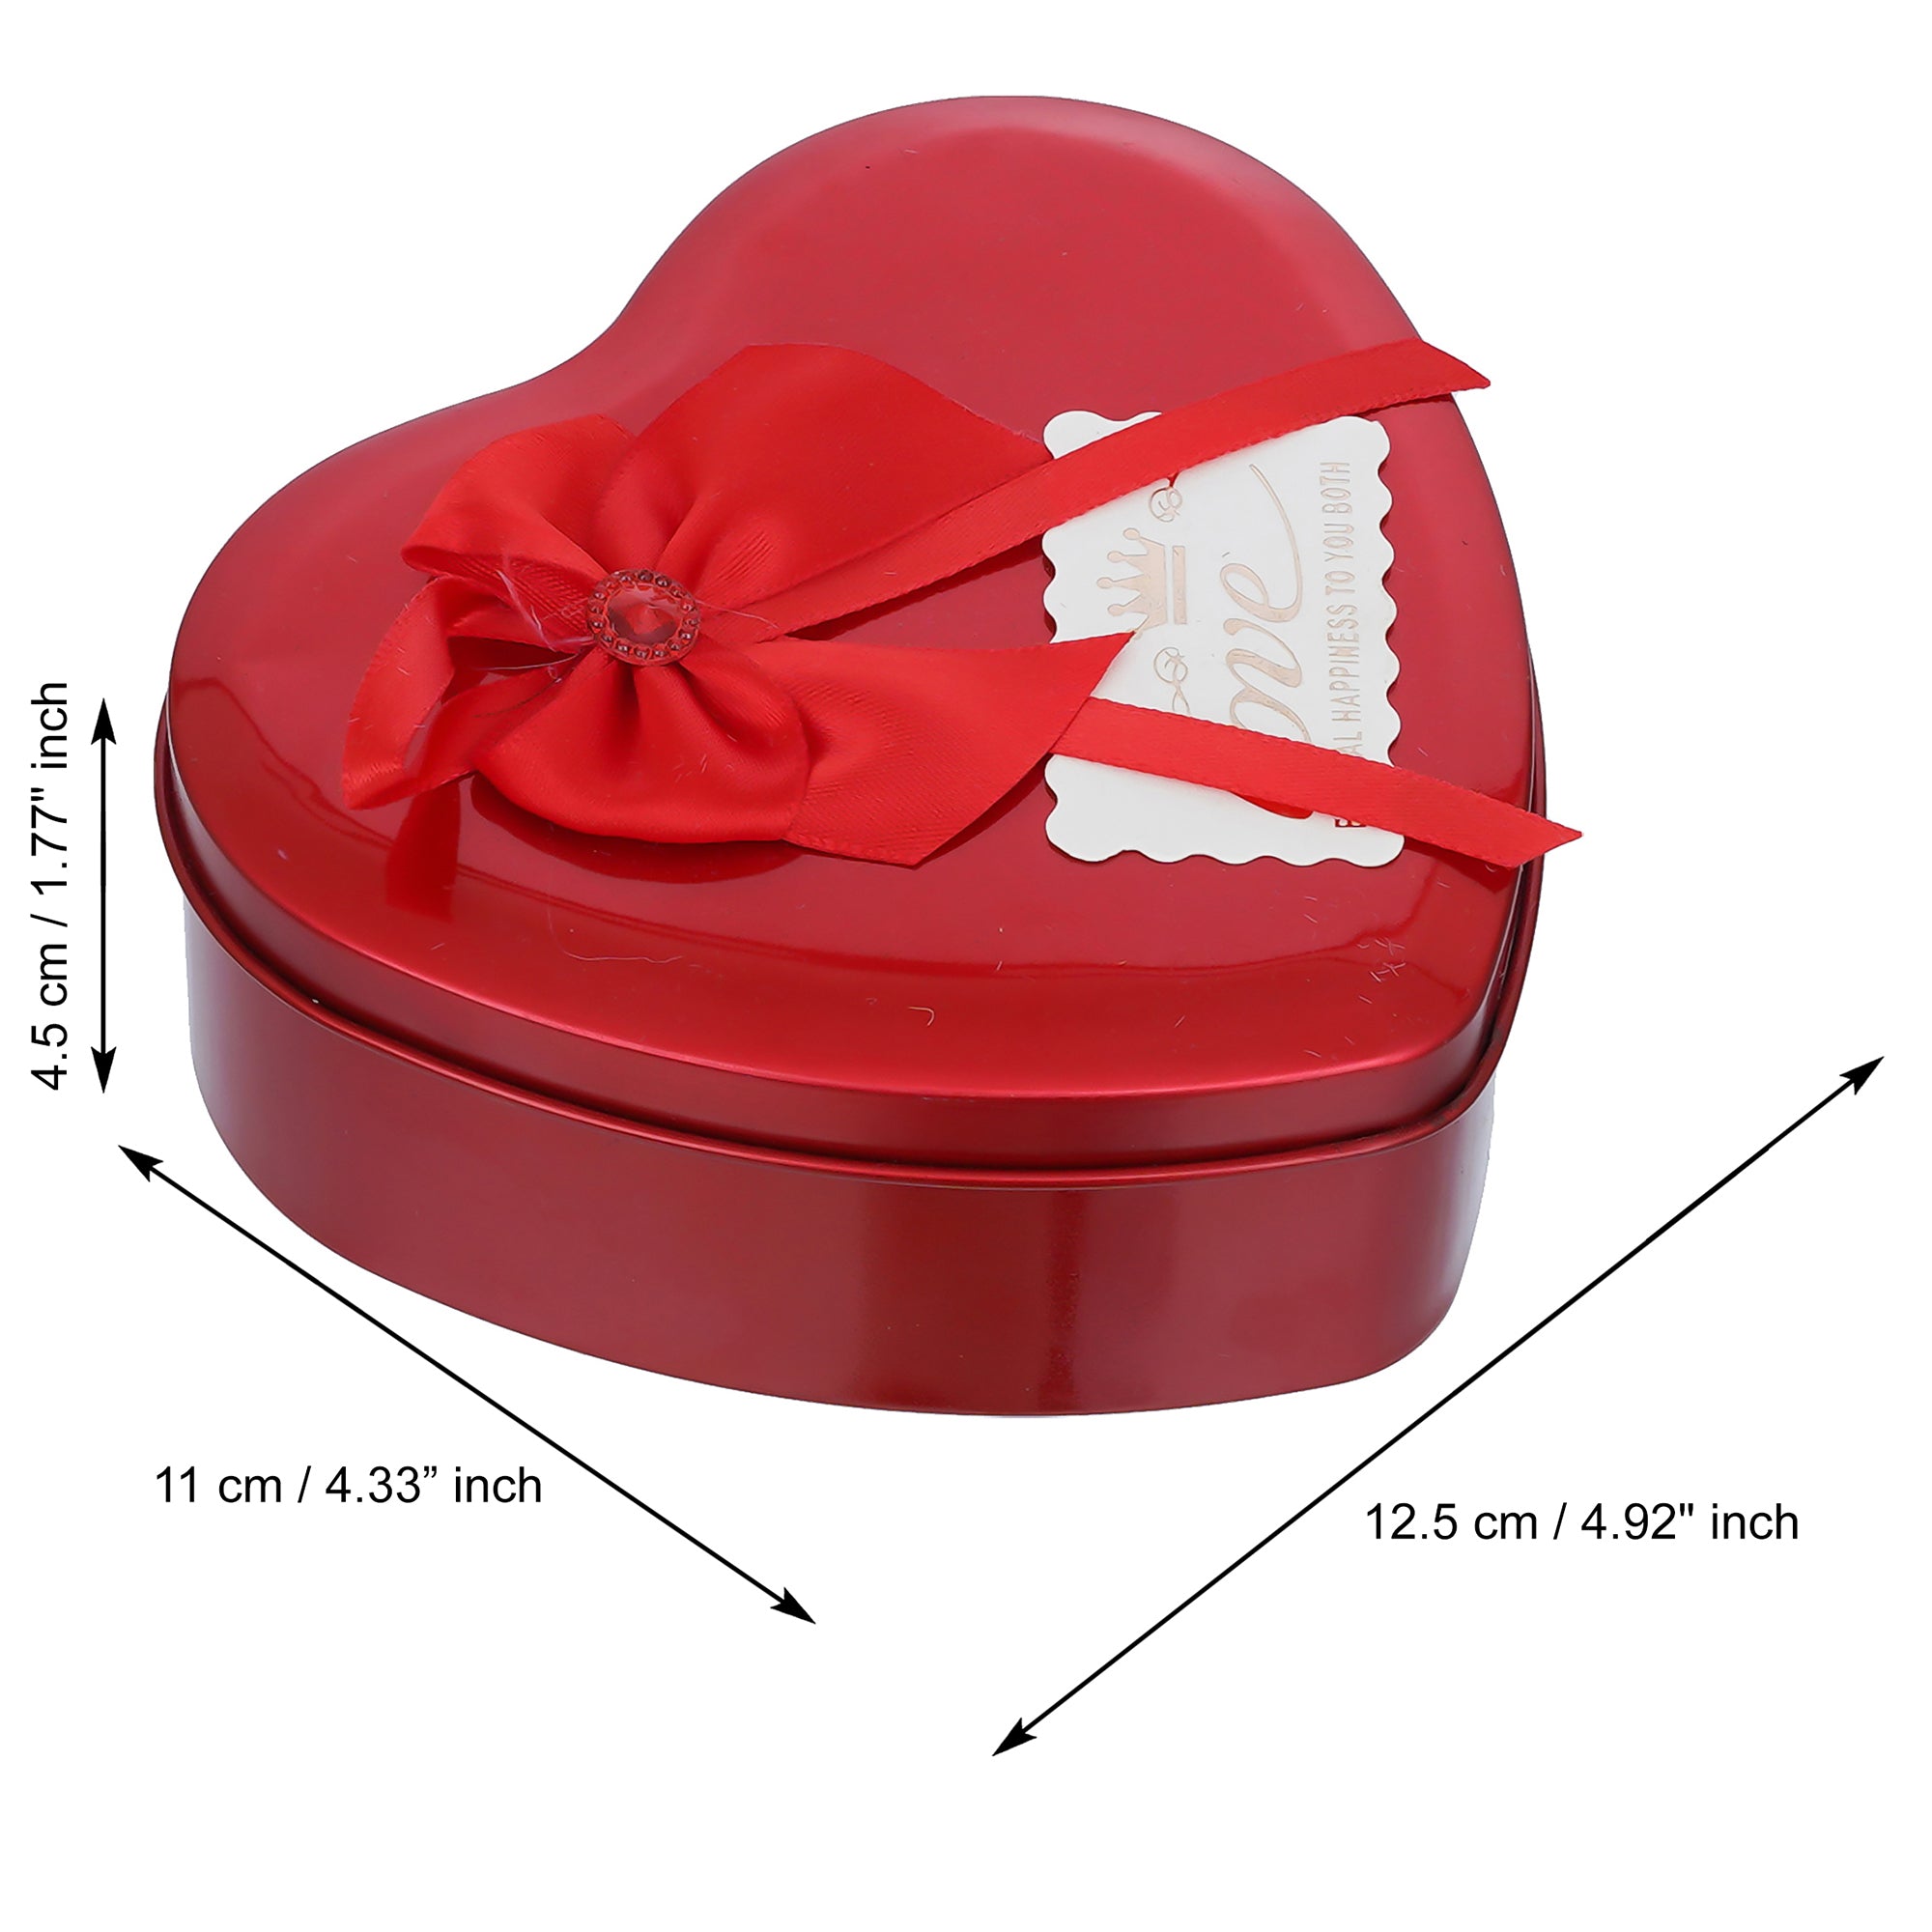 Valentine Combo of Card, Heart Shaped Gift Box Set with White Teddy and Red Roses, Hands Showcasing Red Heart Gift Set 4